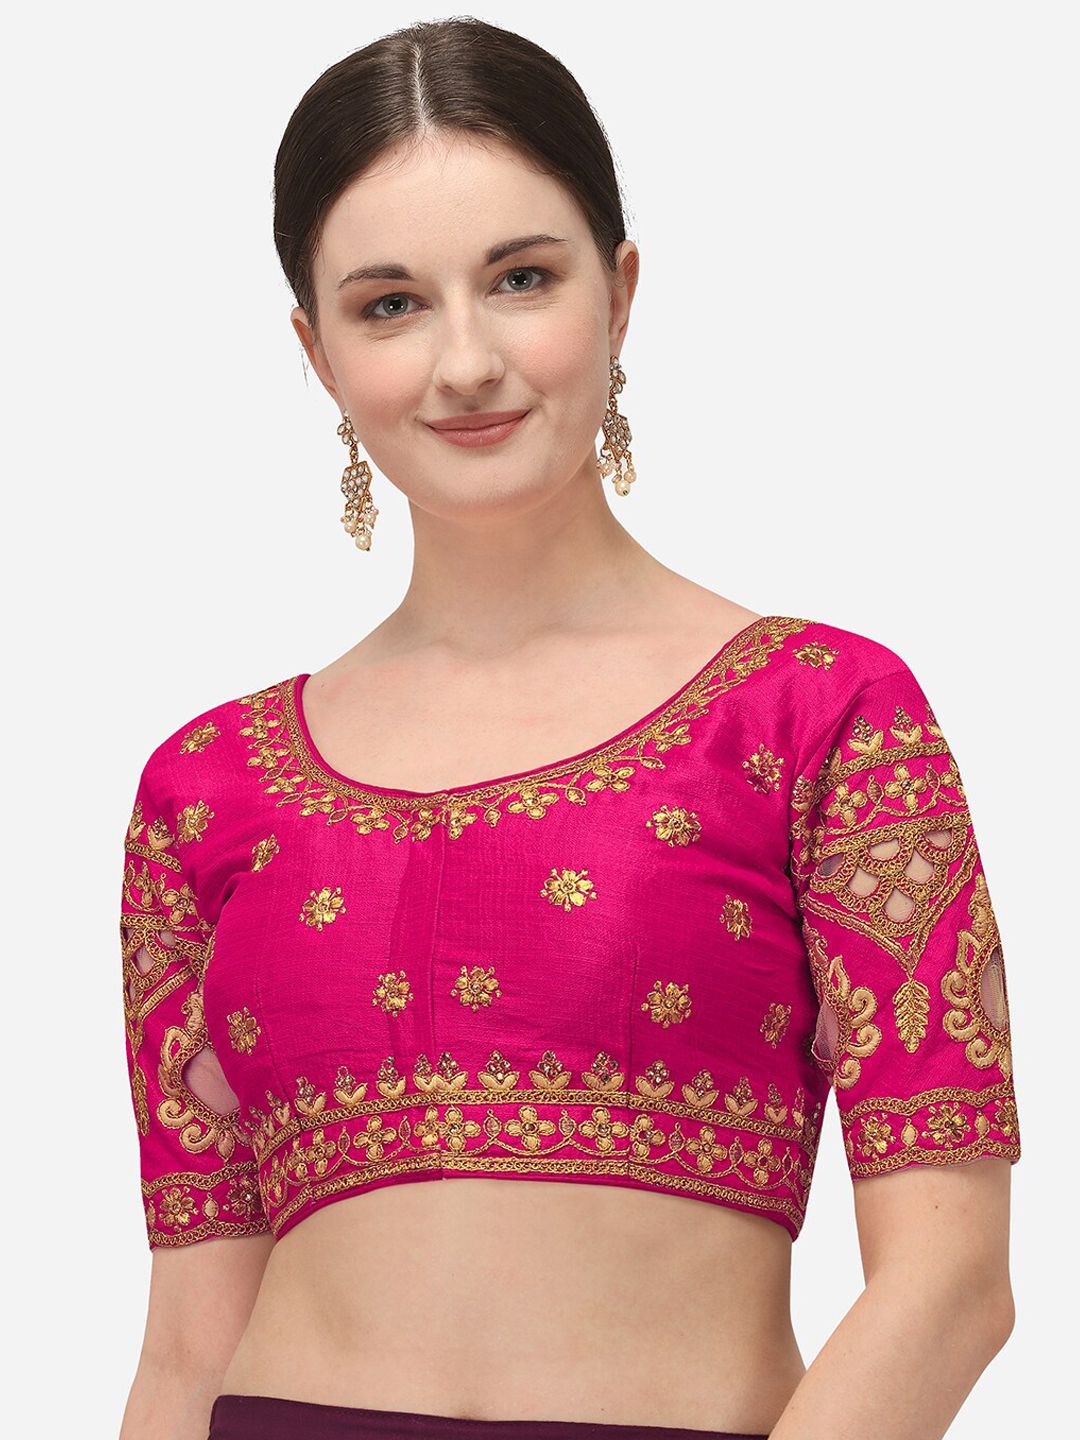 Amrutam Fab Pink & Gold-Coloured Embroidered Silk Saree Blouse Price in India